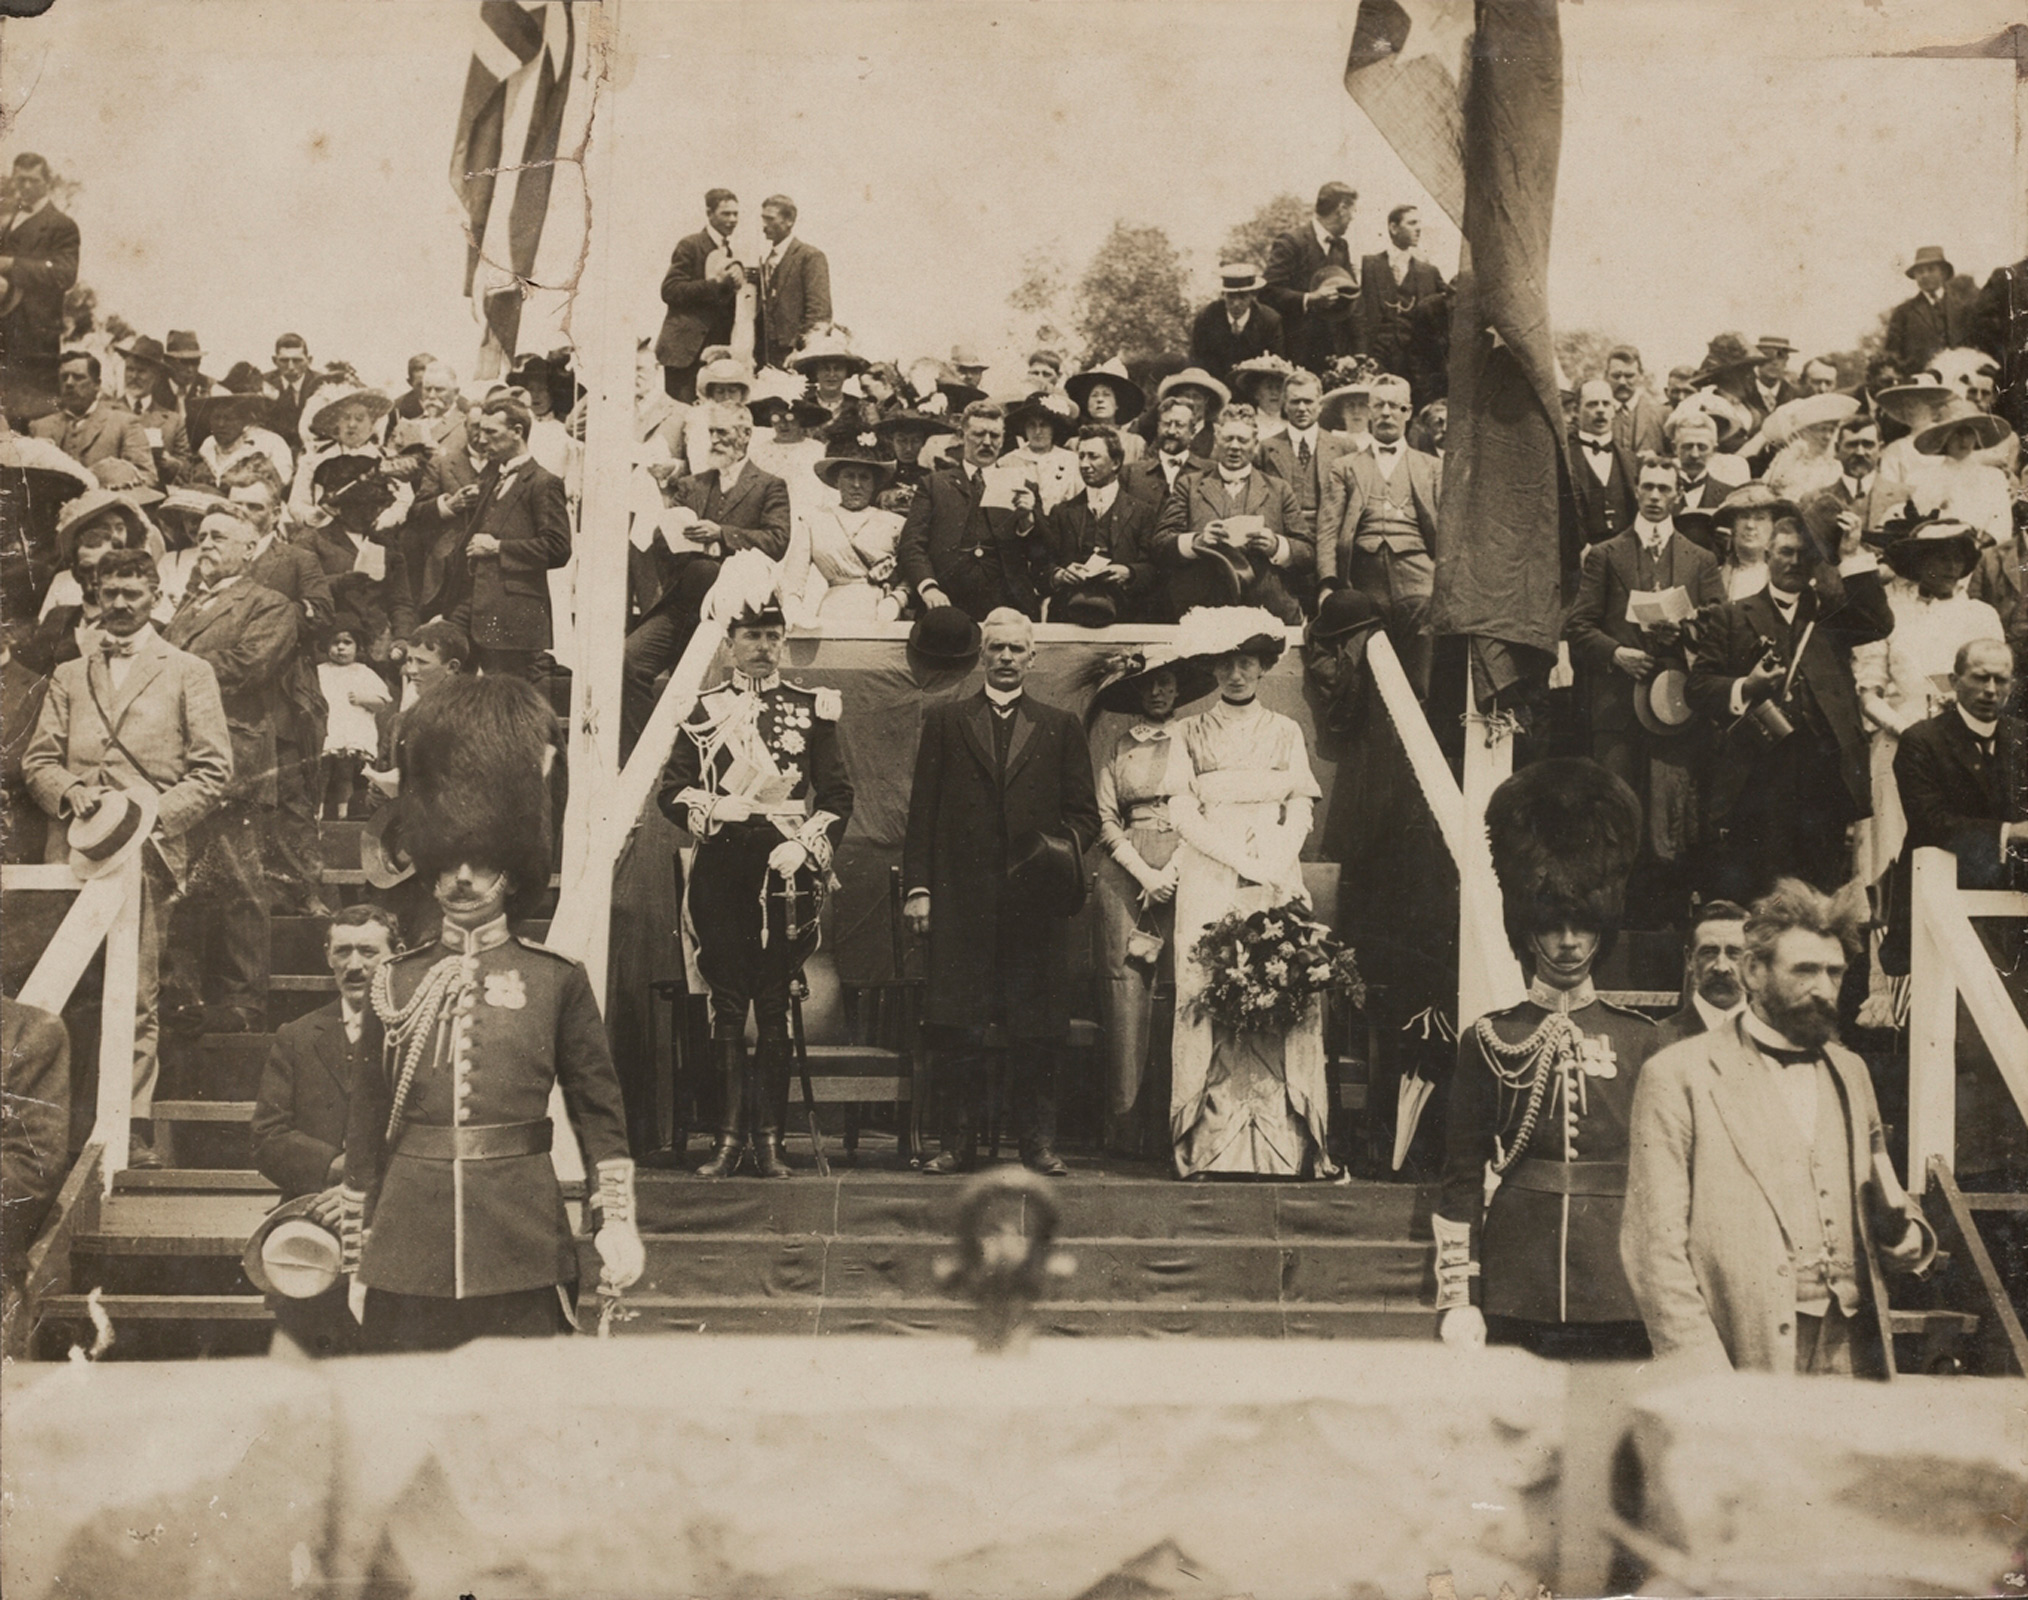 Governor-General Lord Denman and Lady Denman, Minister for Home Affairs King O’Malley and Prime Minister Andrew Fisher at the official ceremony on Capital Hill to mark the commencement of work on Canberra, 12 March 1913